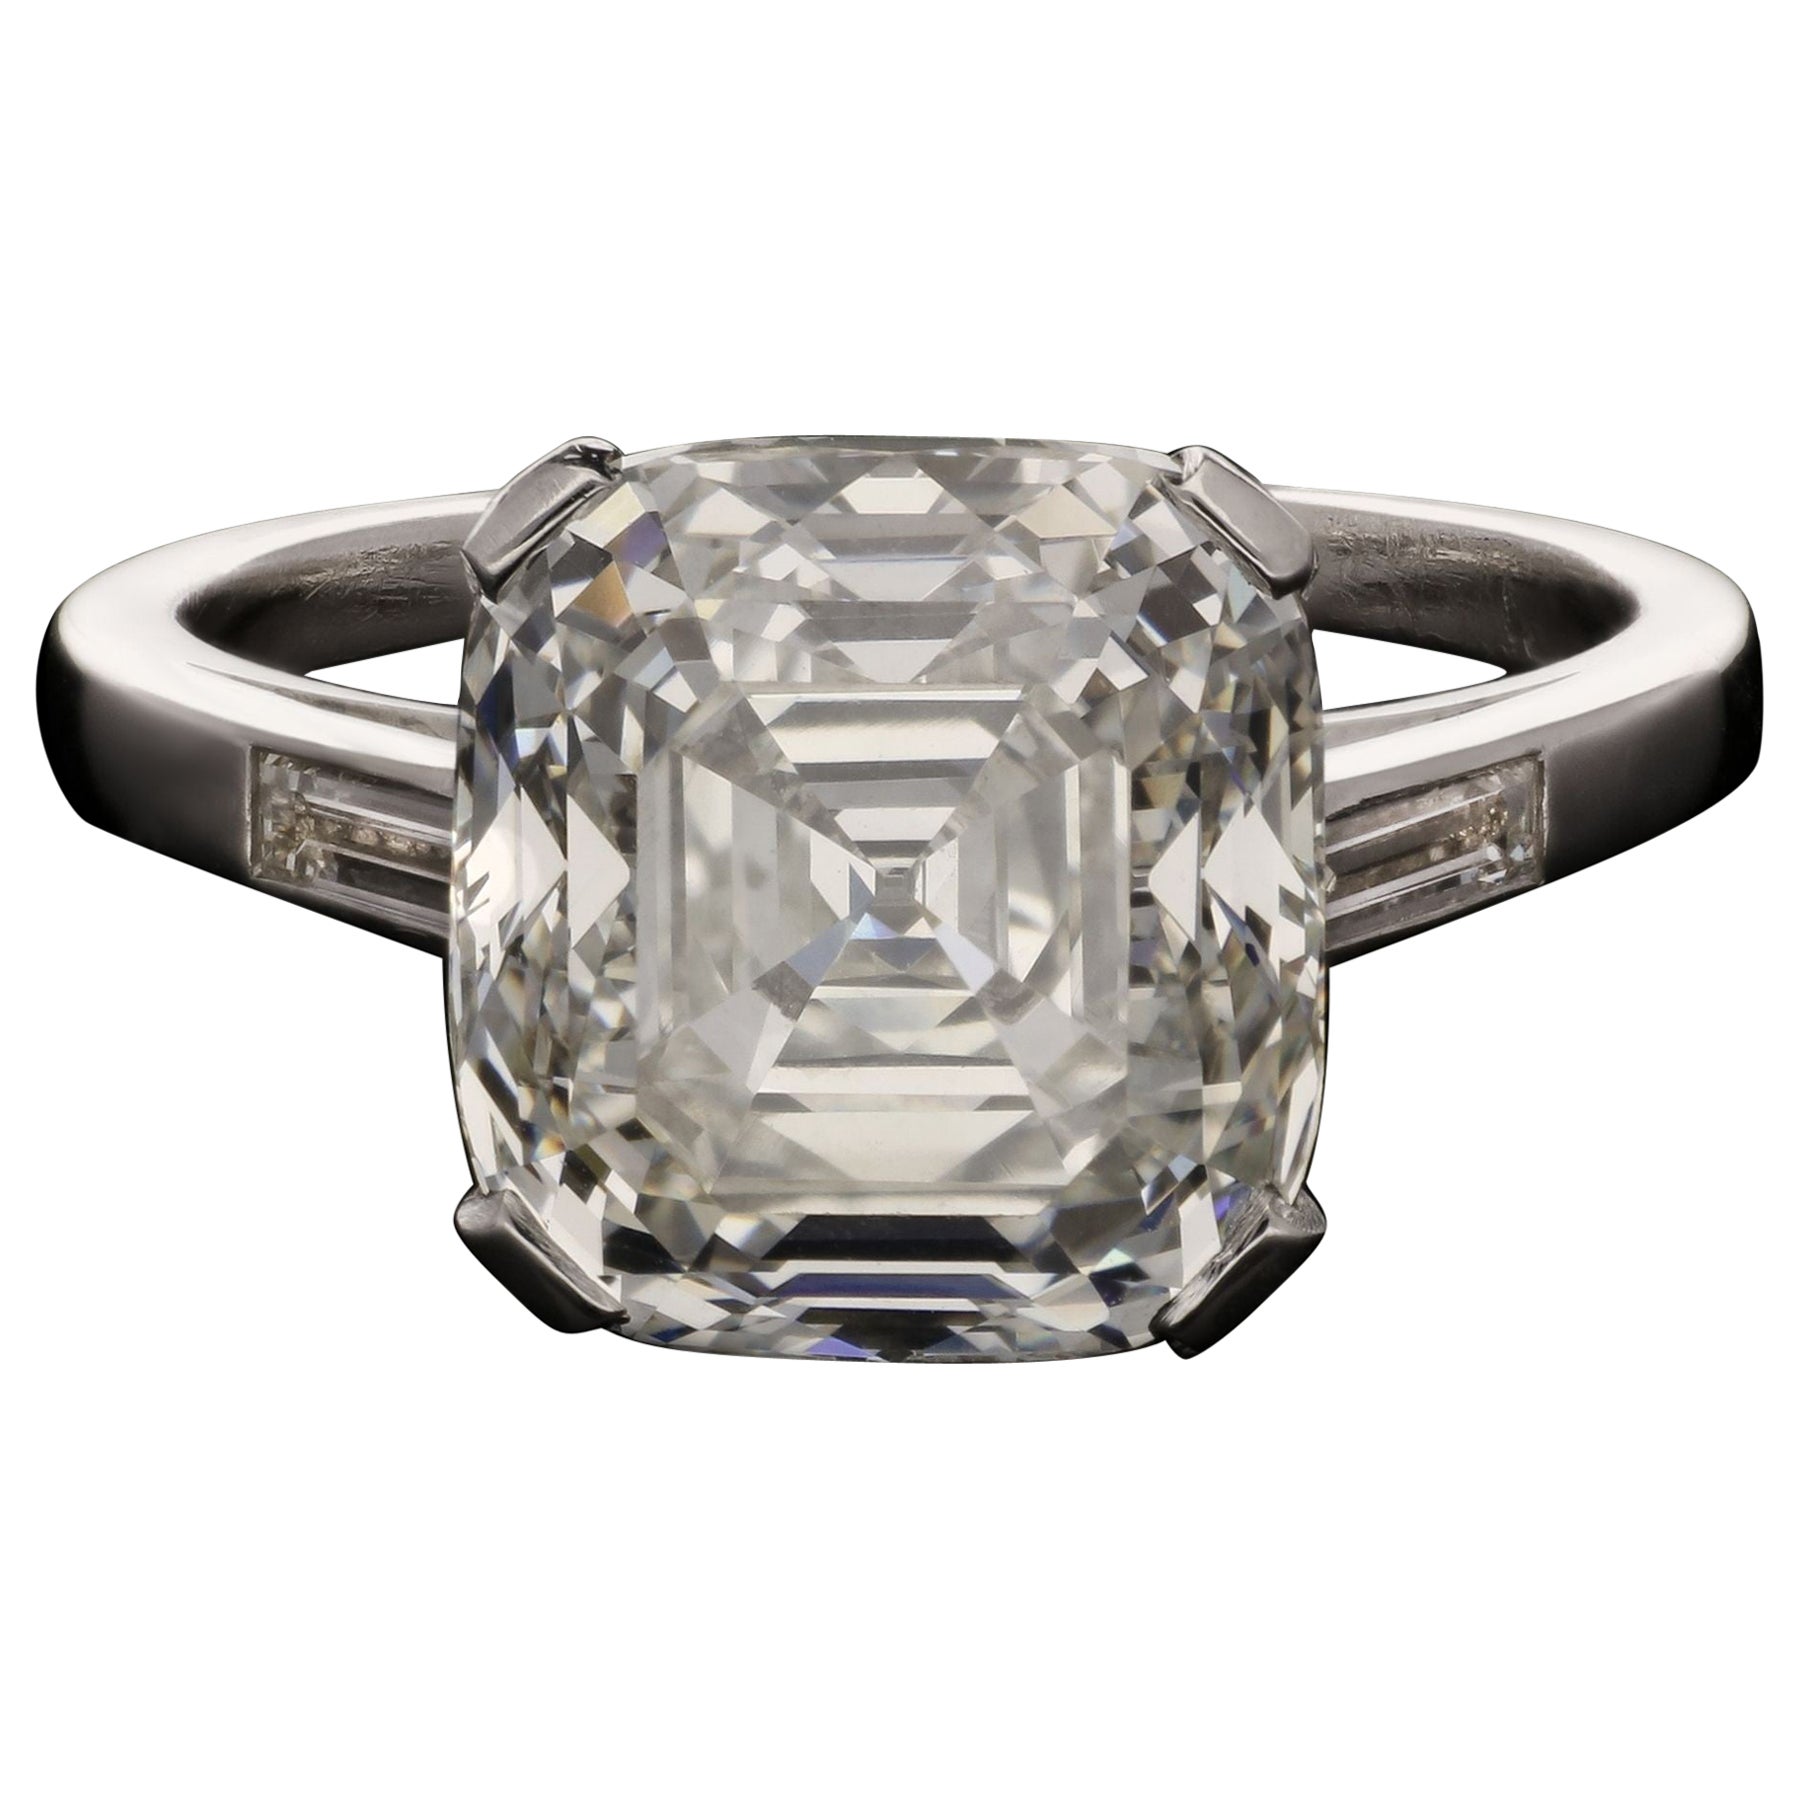 Vintage 5.24ct Mixed Cut Diamond and Platinum Ring Circa 1930s For Sale